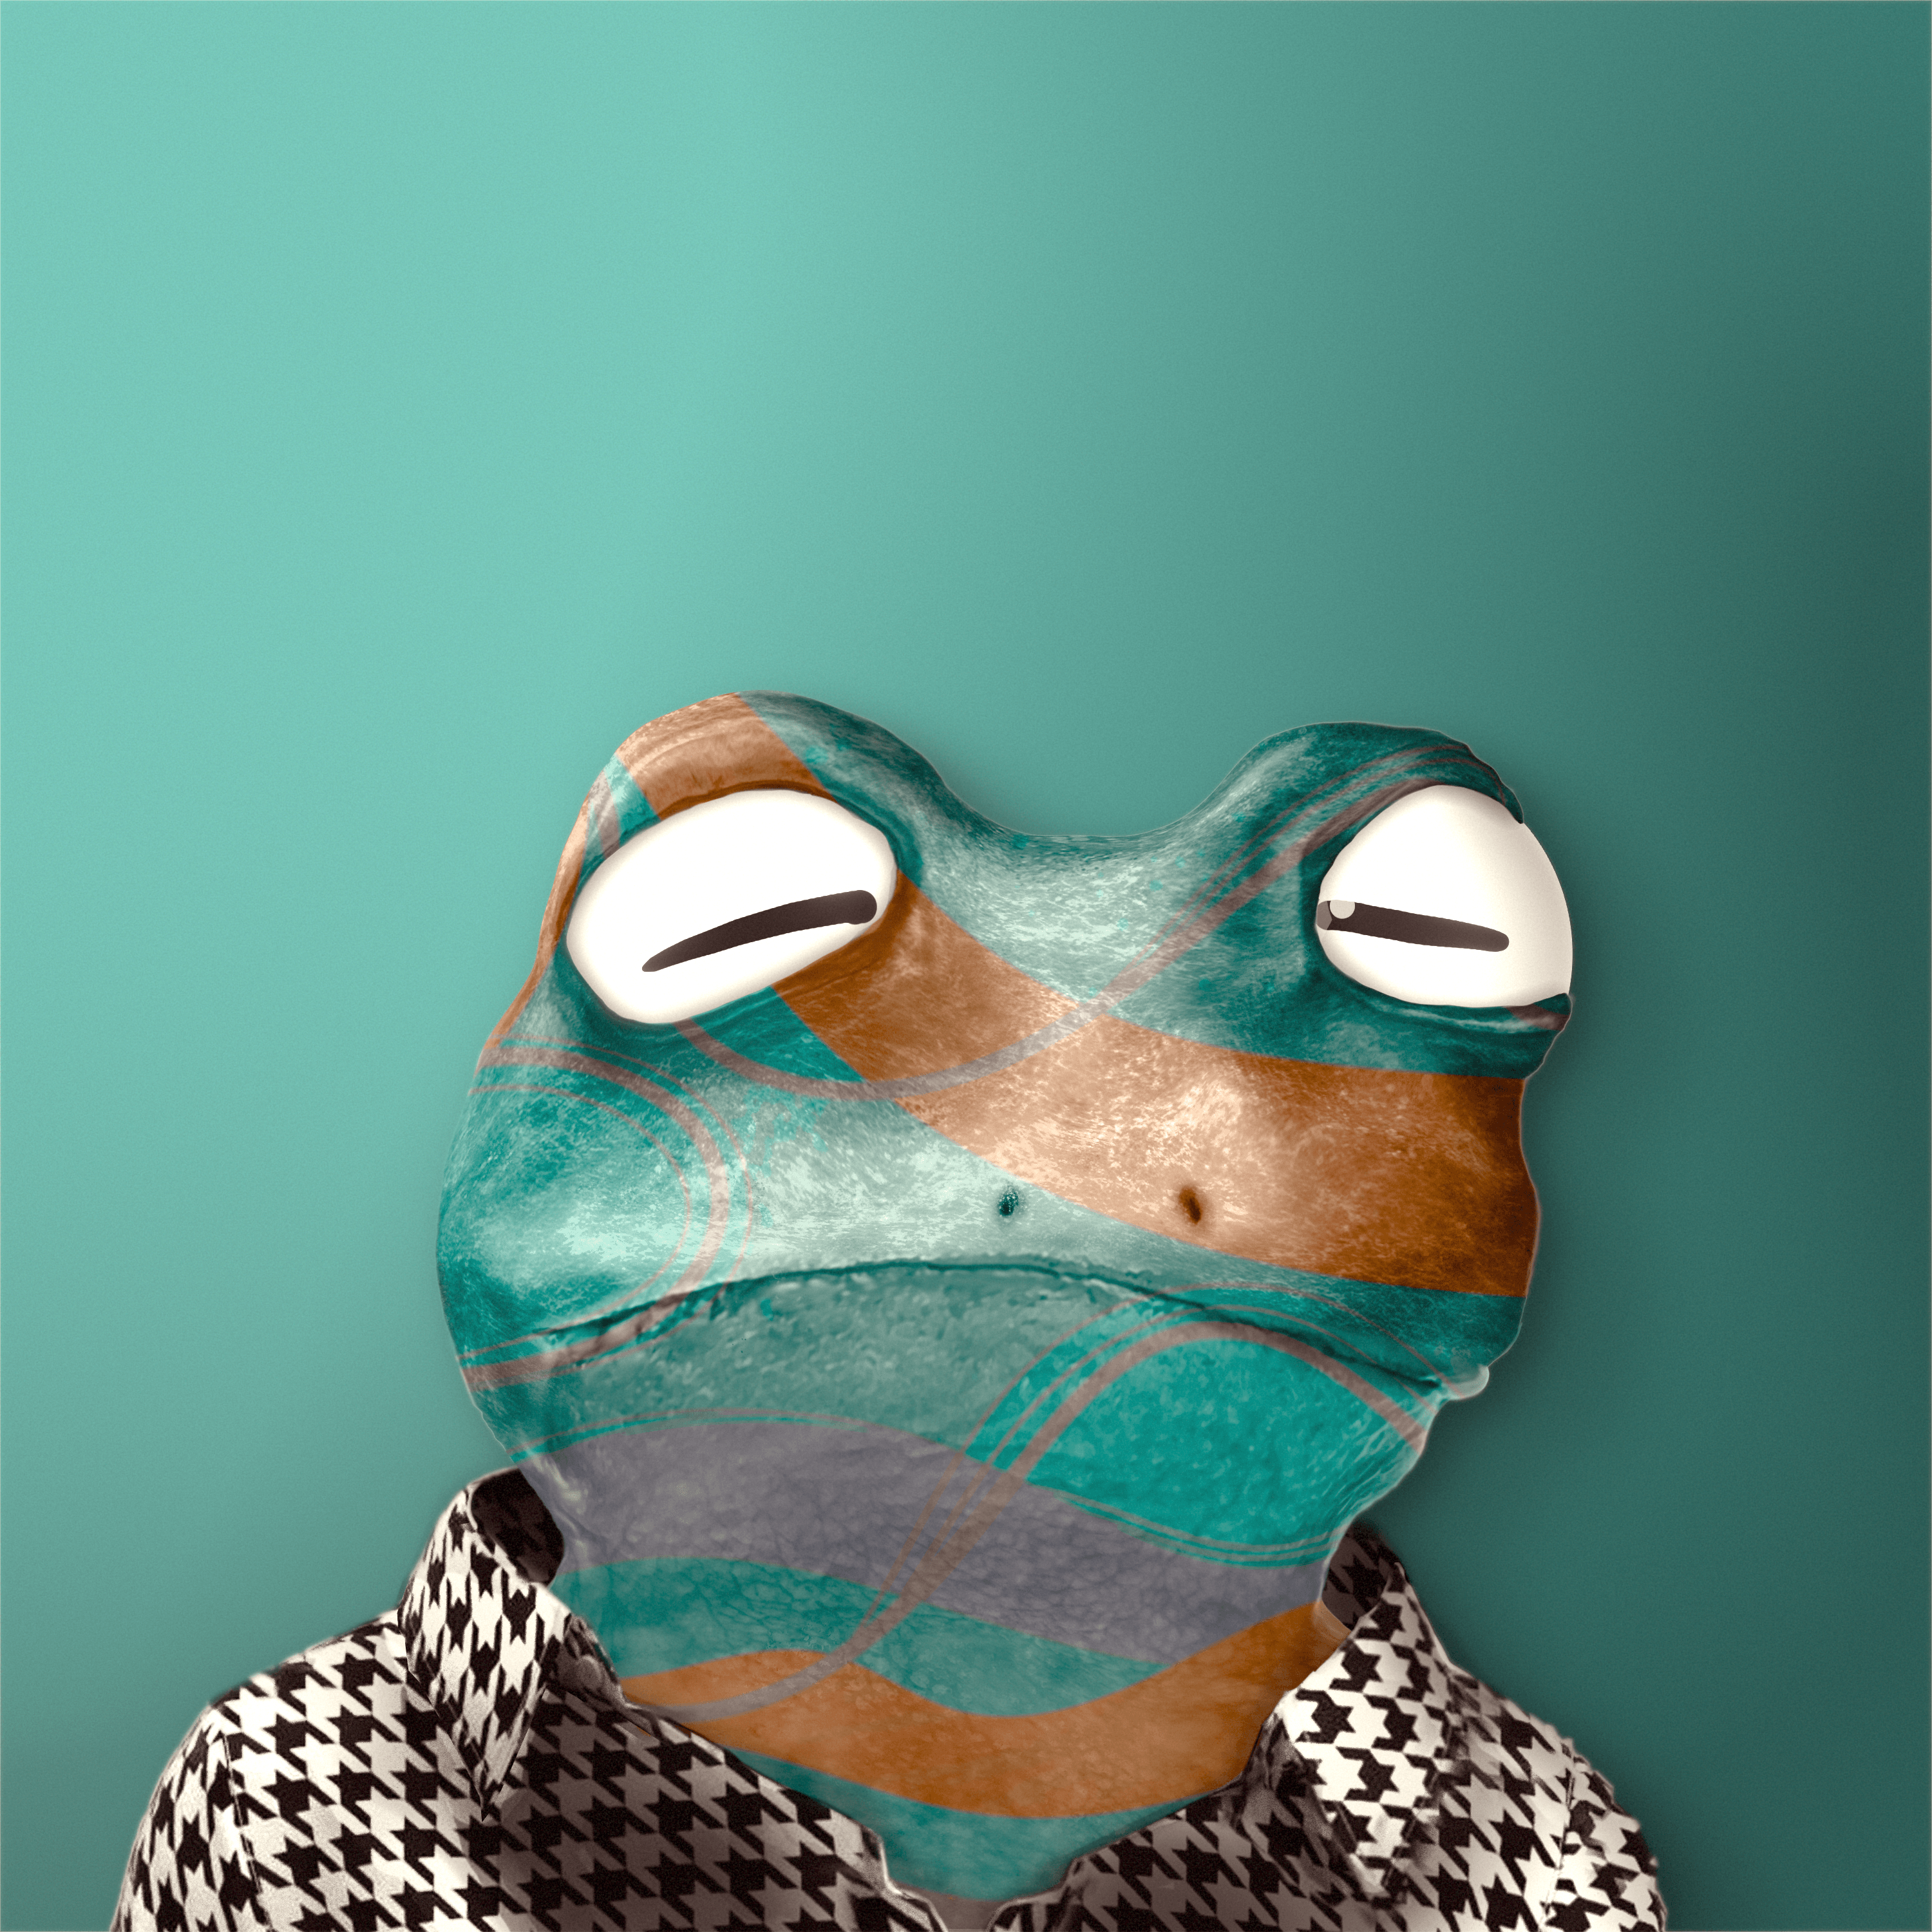 Notorious Frog #7277